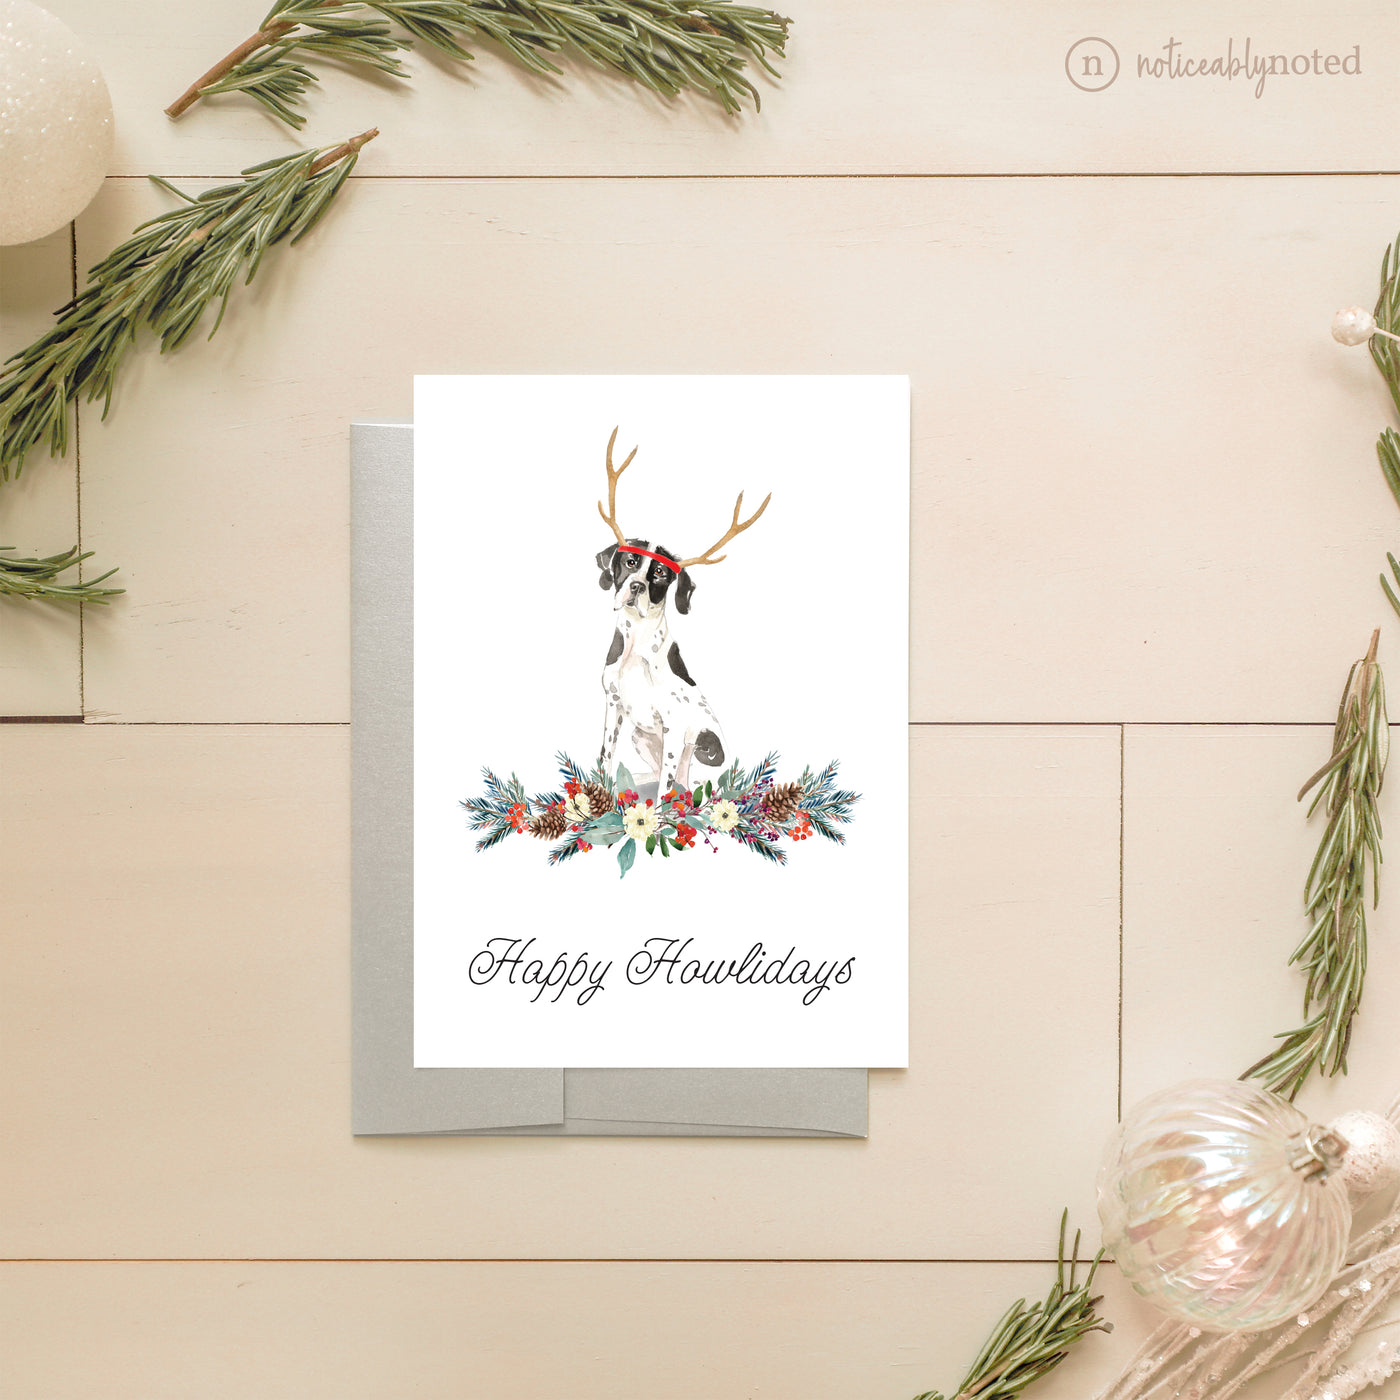 English Pointer Dog Holiday Card | Noticeably Noted